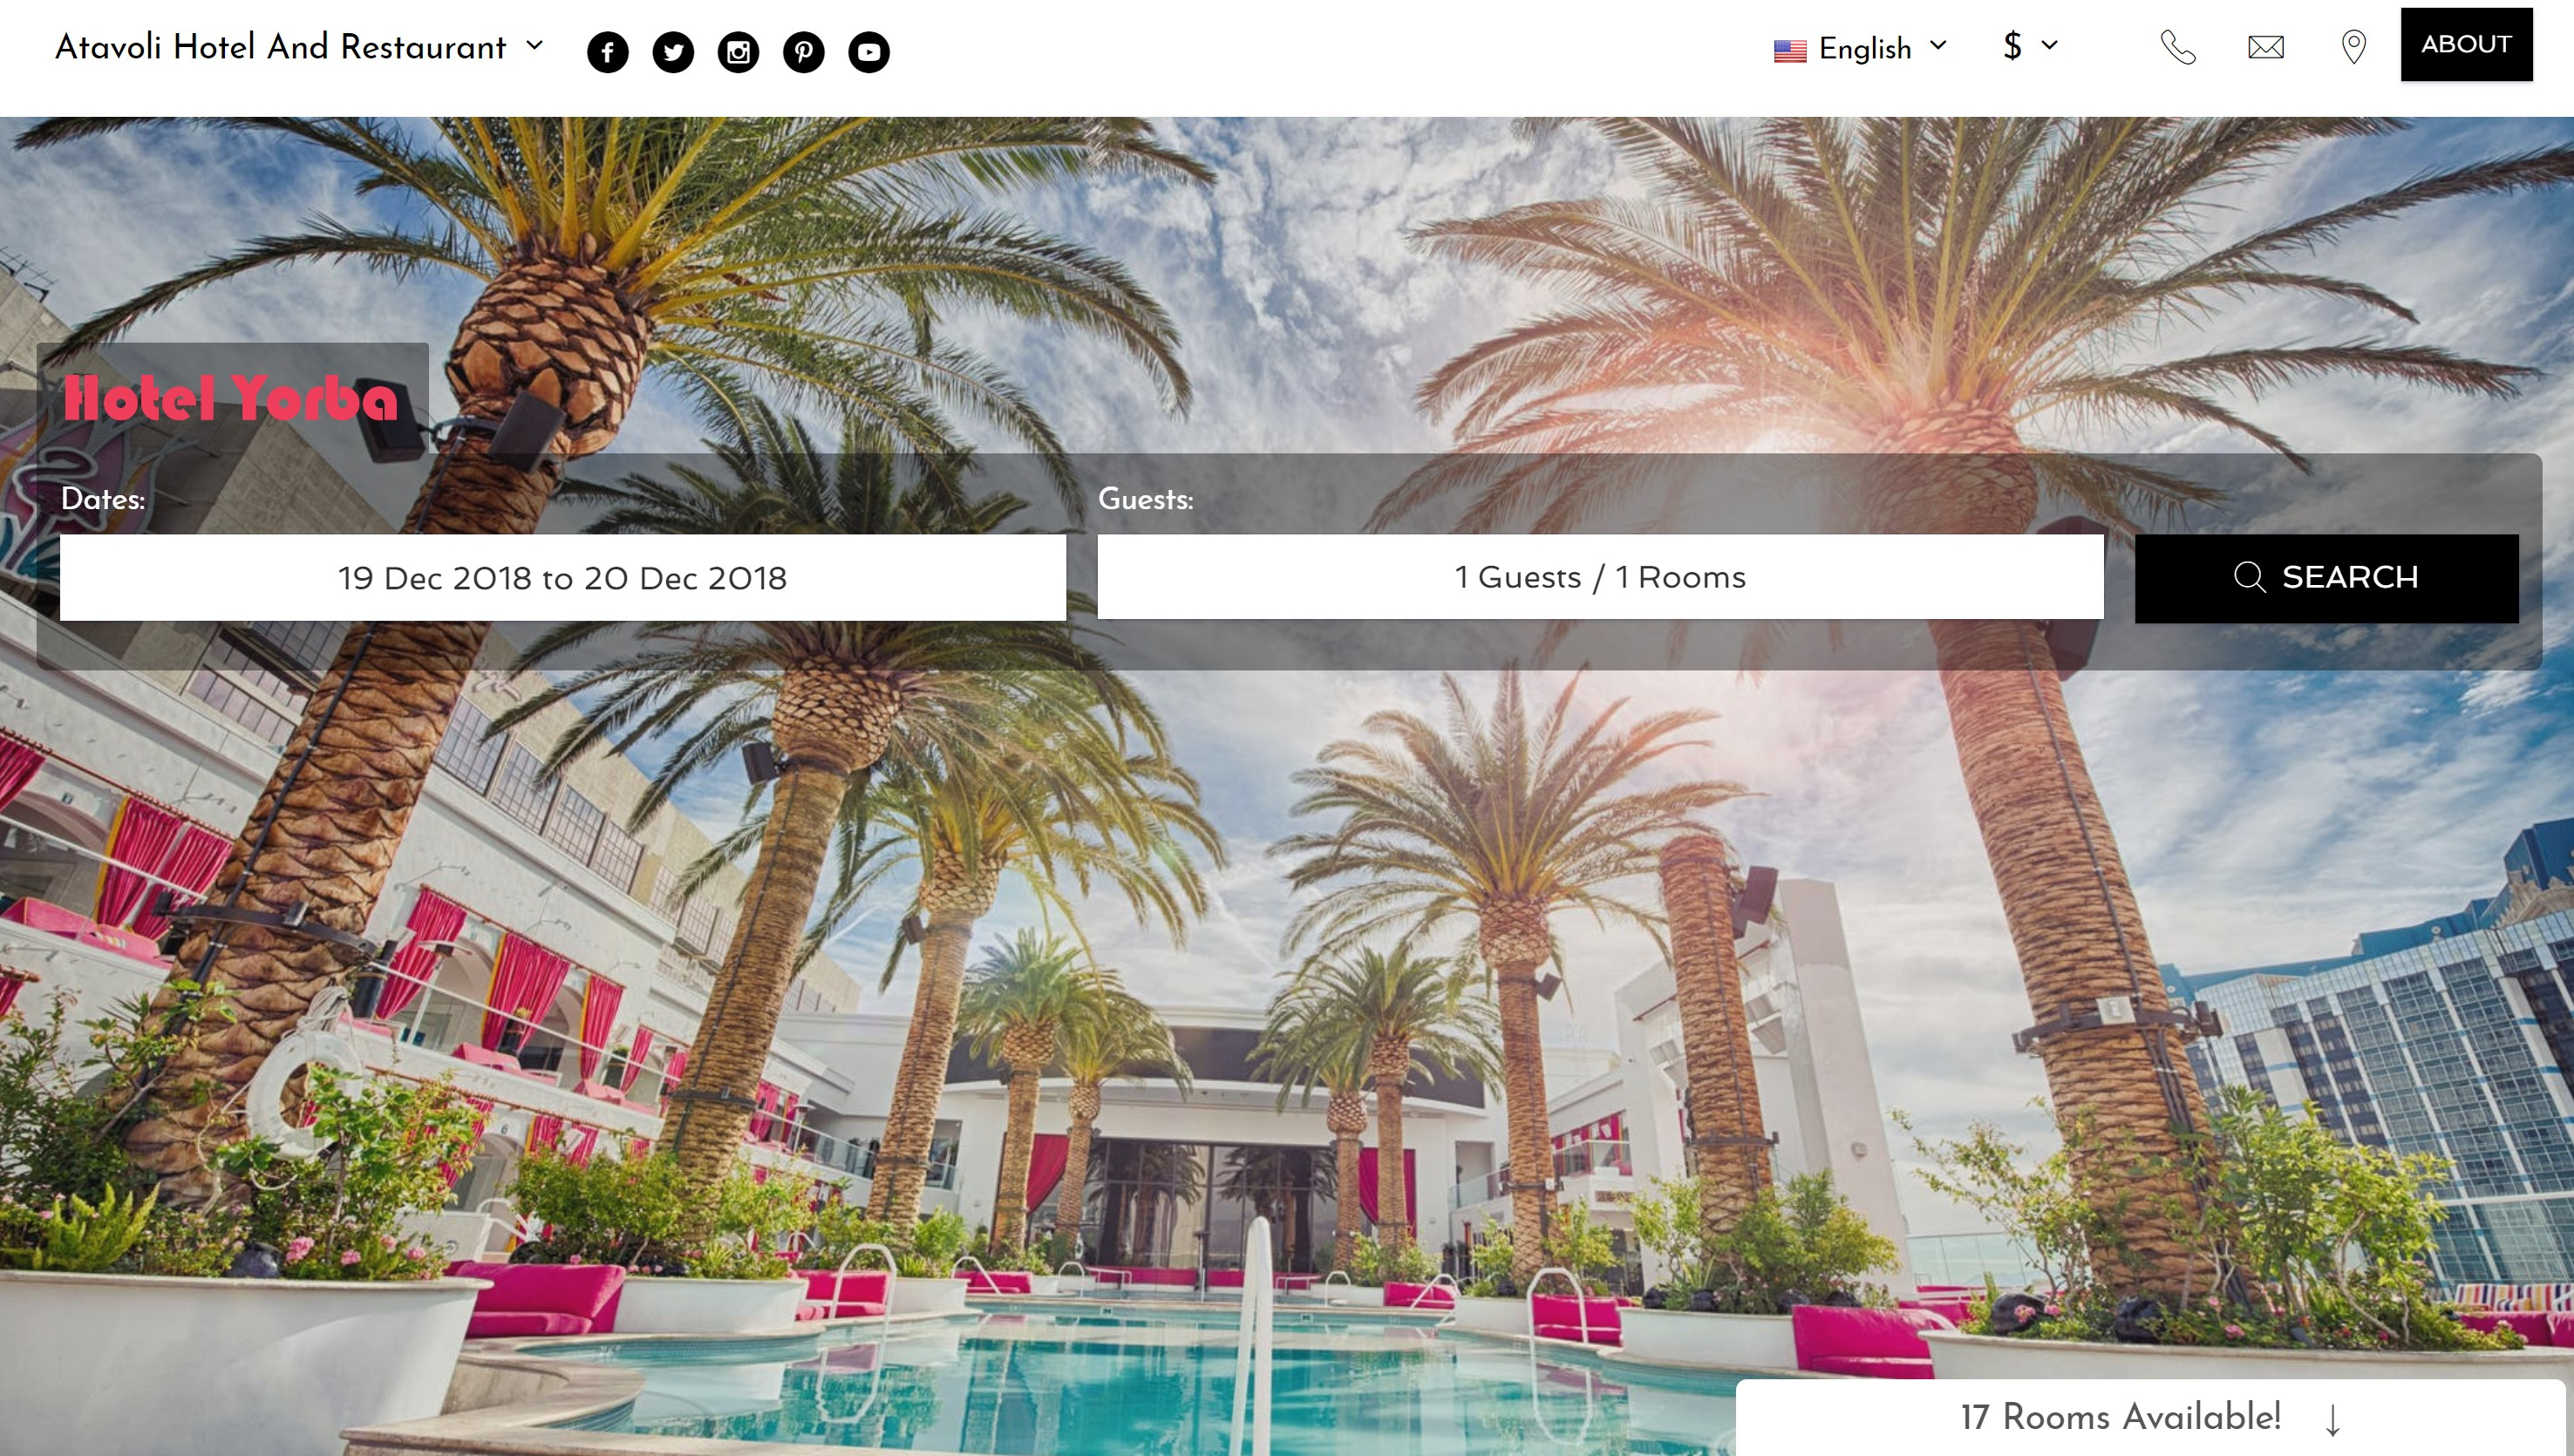 Your premium subscription to Bellebnb.com includes an embeddable booking widget, or ‘booking button’. Your guests can book rooms directly from your hotel website. Visitors don’t have to leave your website and reservations made through the booking button are commission free.